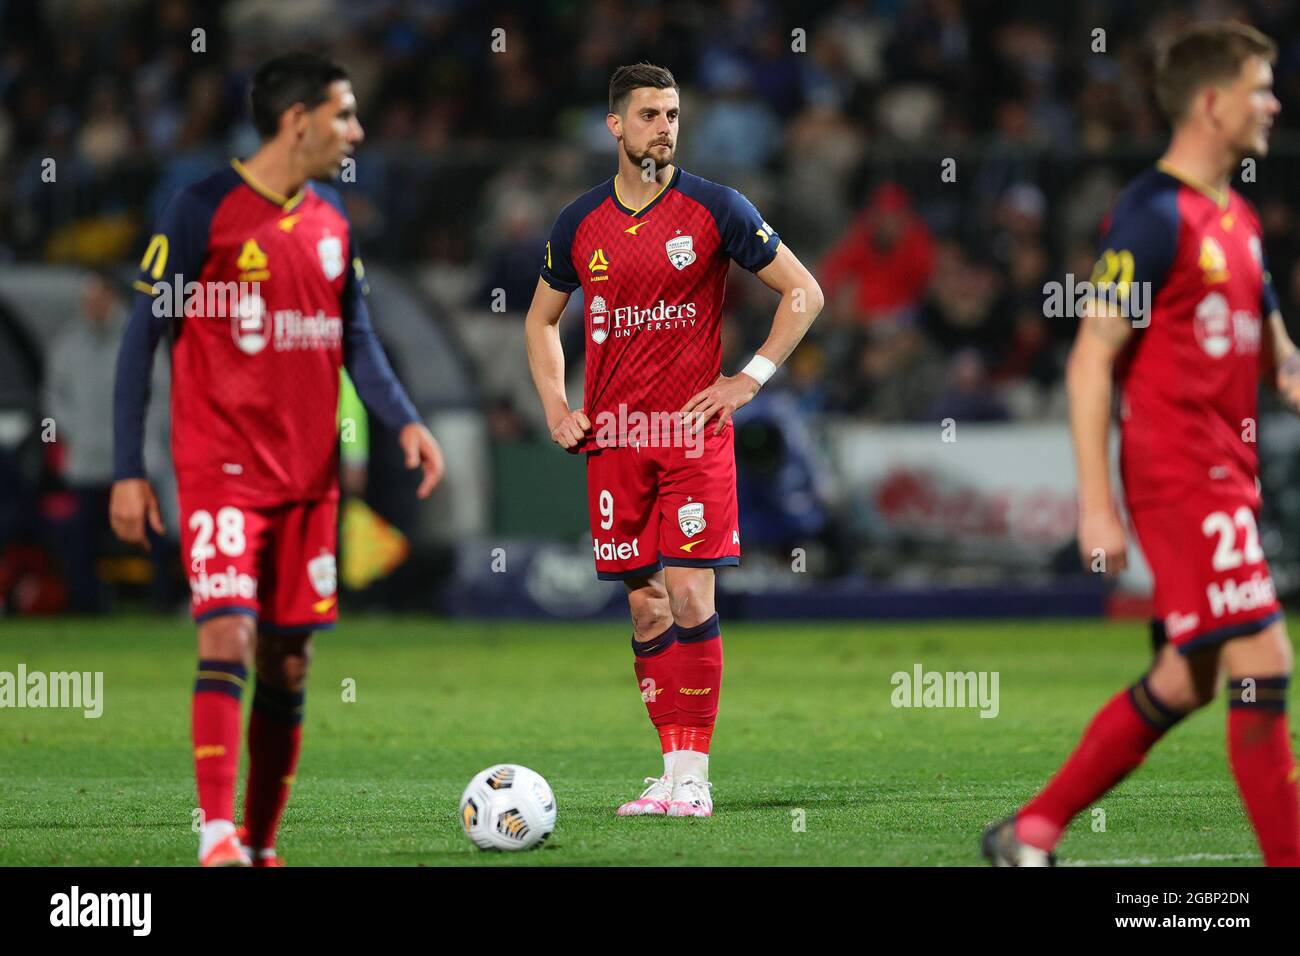 SYDNEY, AUSTRALIA - JUNE 19: Tomi Juric of Adelaide United lines up a free kick during the A-League semi-final soccer match between Sydney FC and Adelaide United on June 19, 2021 at Netstrata Jubilee Stadium in Sydney, Australia. Credit: Pete Dovgan/Speed Media/Alamy Live News Stock Photo